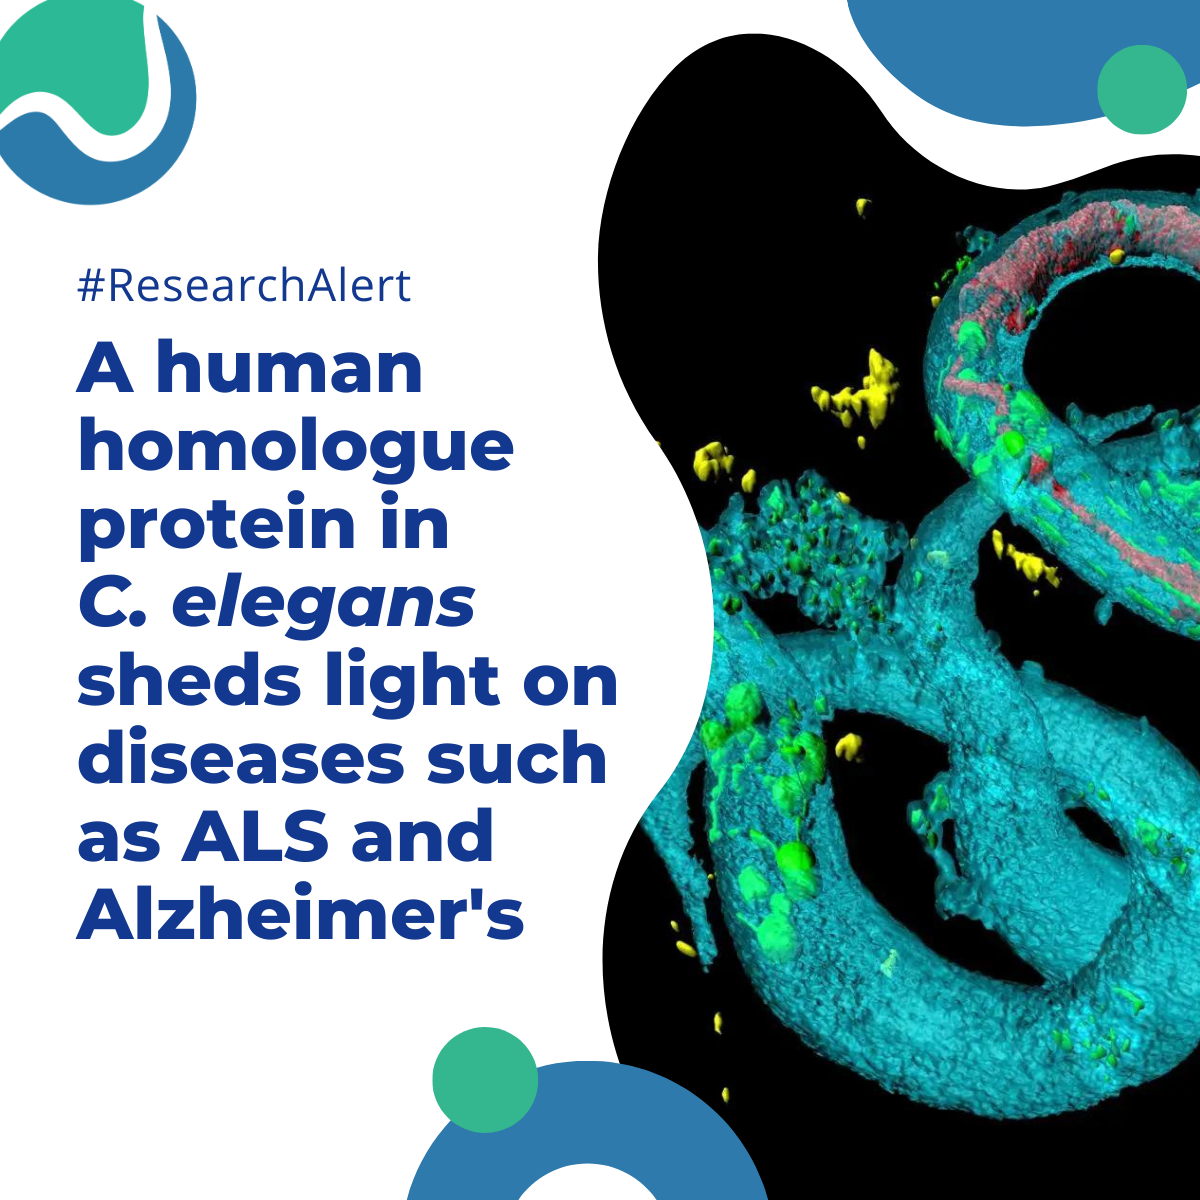 #ResearchAlert - A human homologue protein in C. elegans sheds light on diseases such as ALS and Alzheimer's